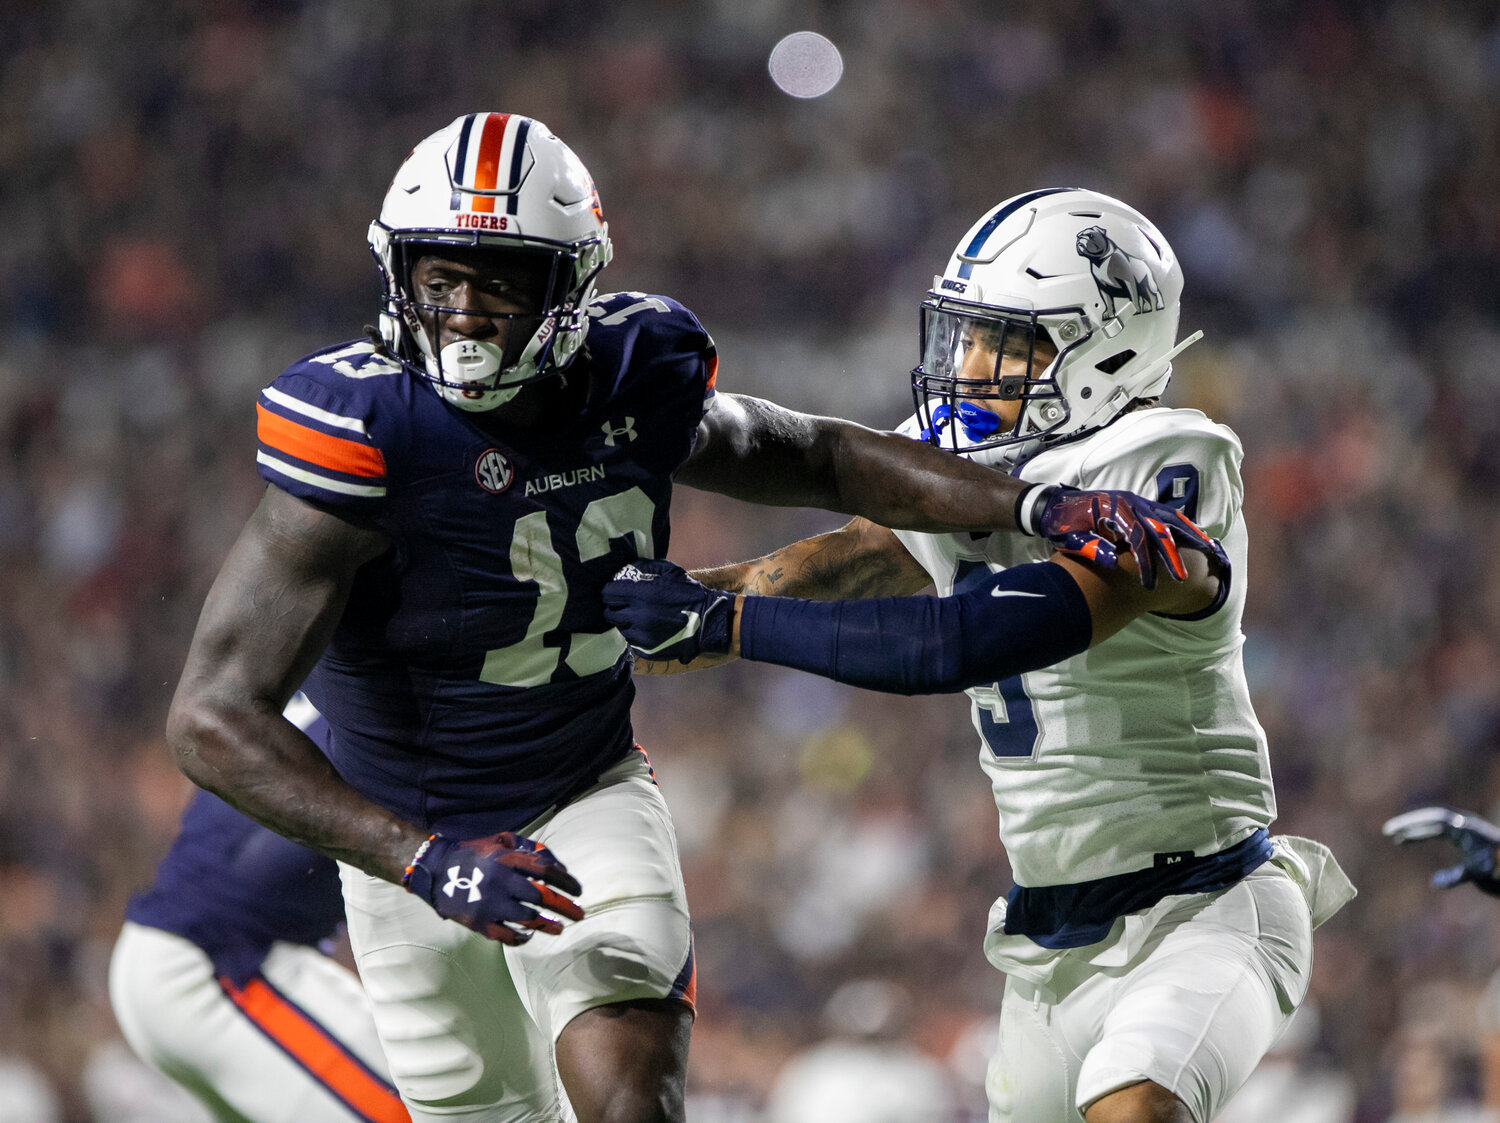 Daphne alum Midnight Steward tracks the release of Auburn junior Rivaldo Fairweather during the second half of Samford’s Saturday night game on Pat Dye Field. Steward finished with 2 tackles in the Bulldogs’ 45-13 defeat.